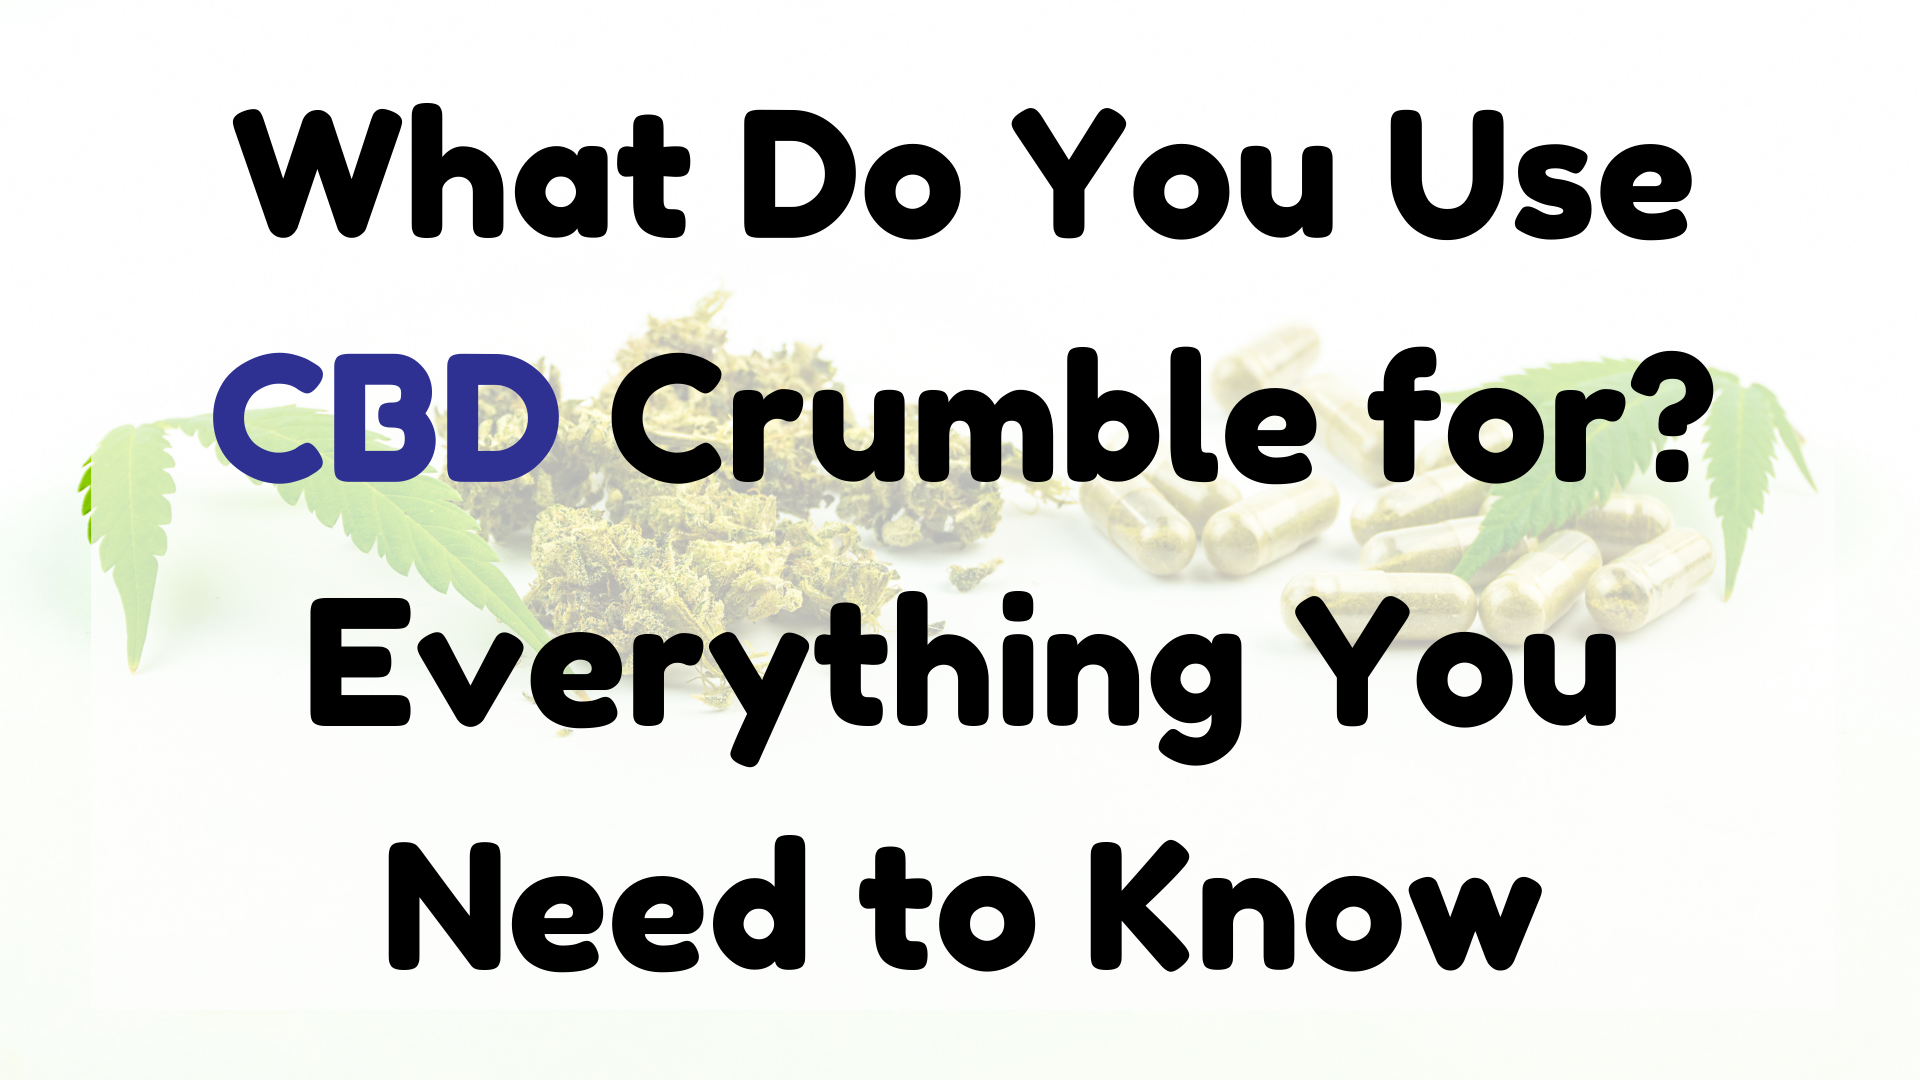 What Do You Use CBD Crumble for